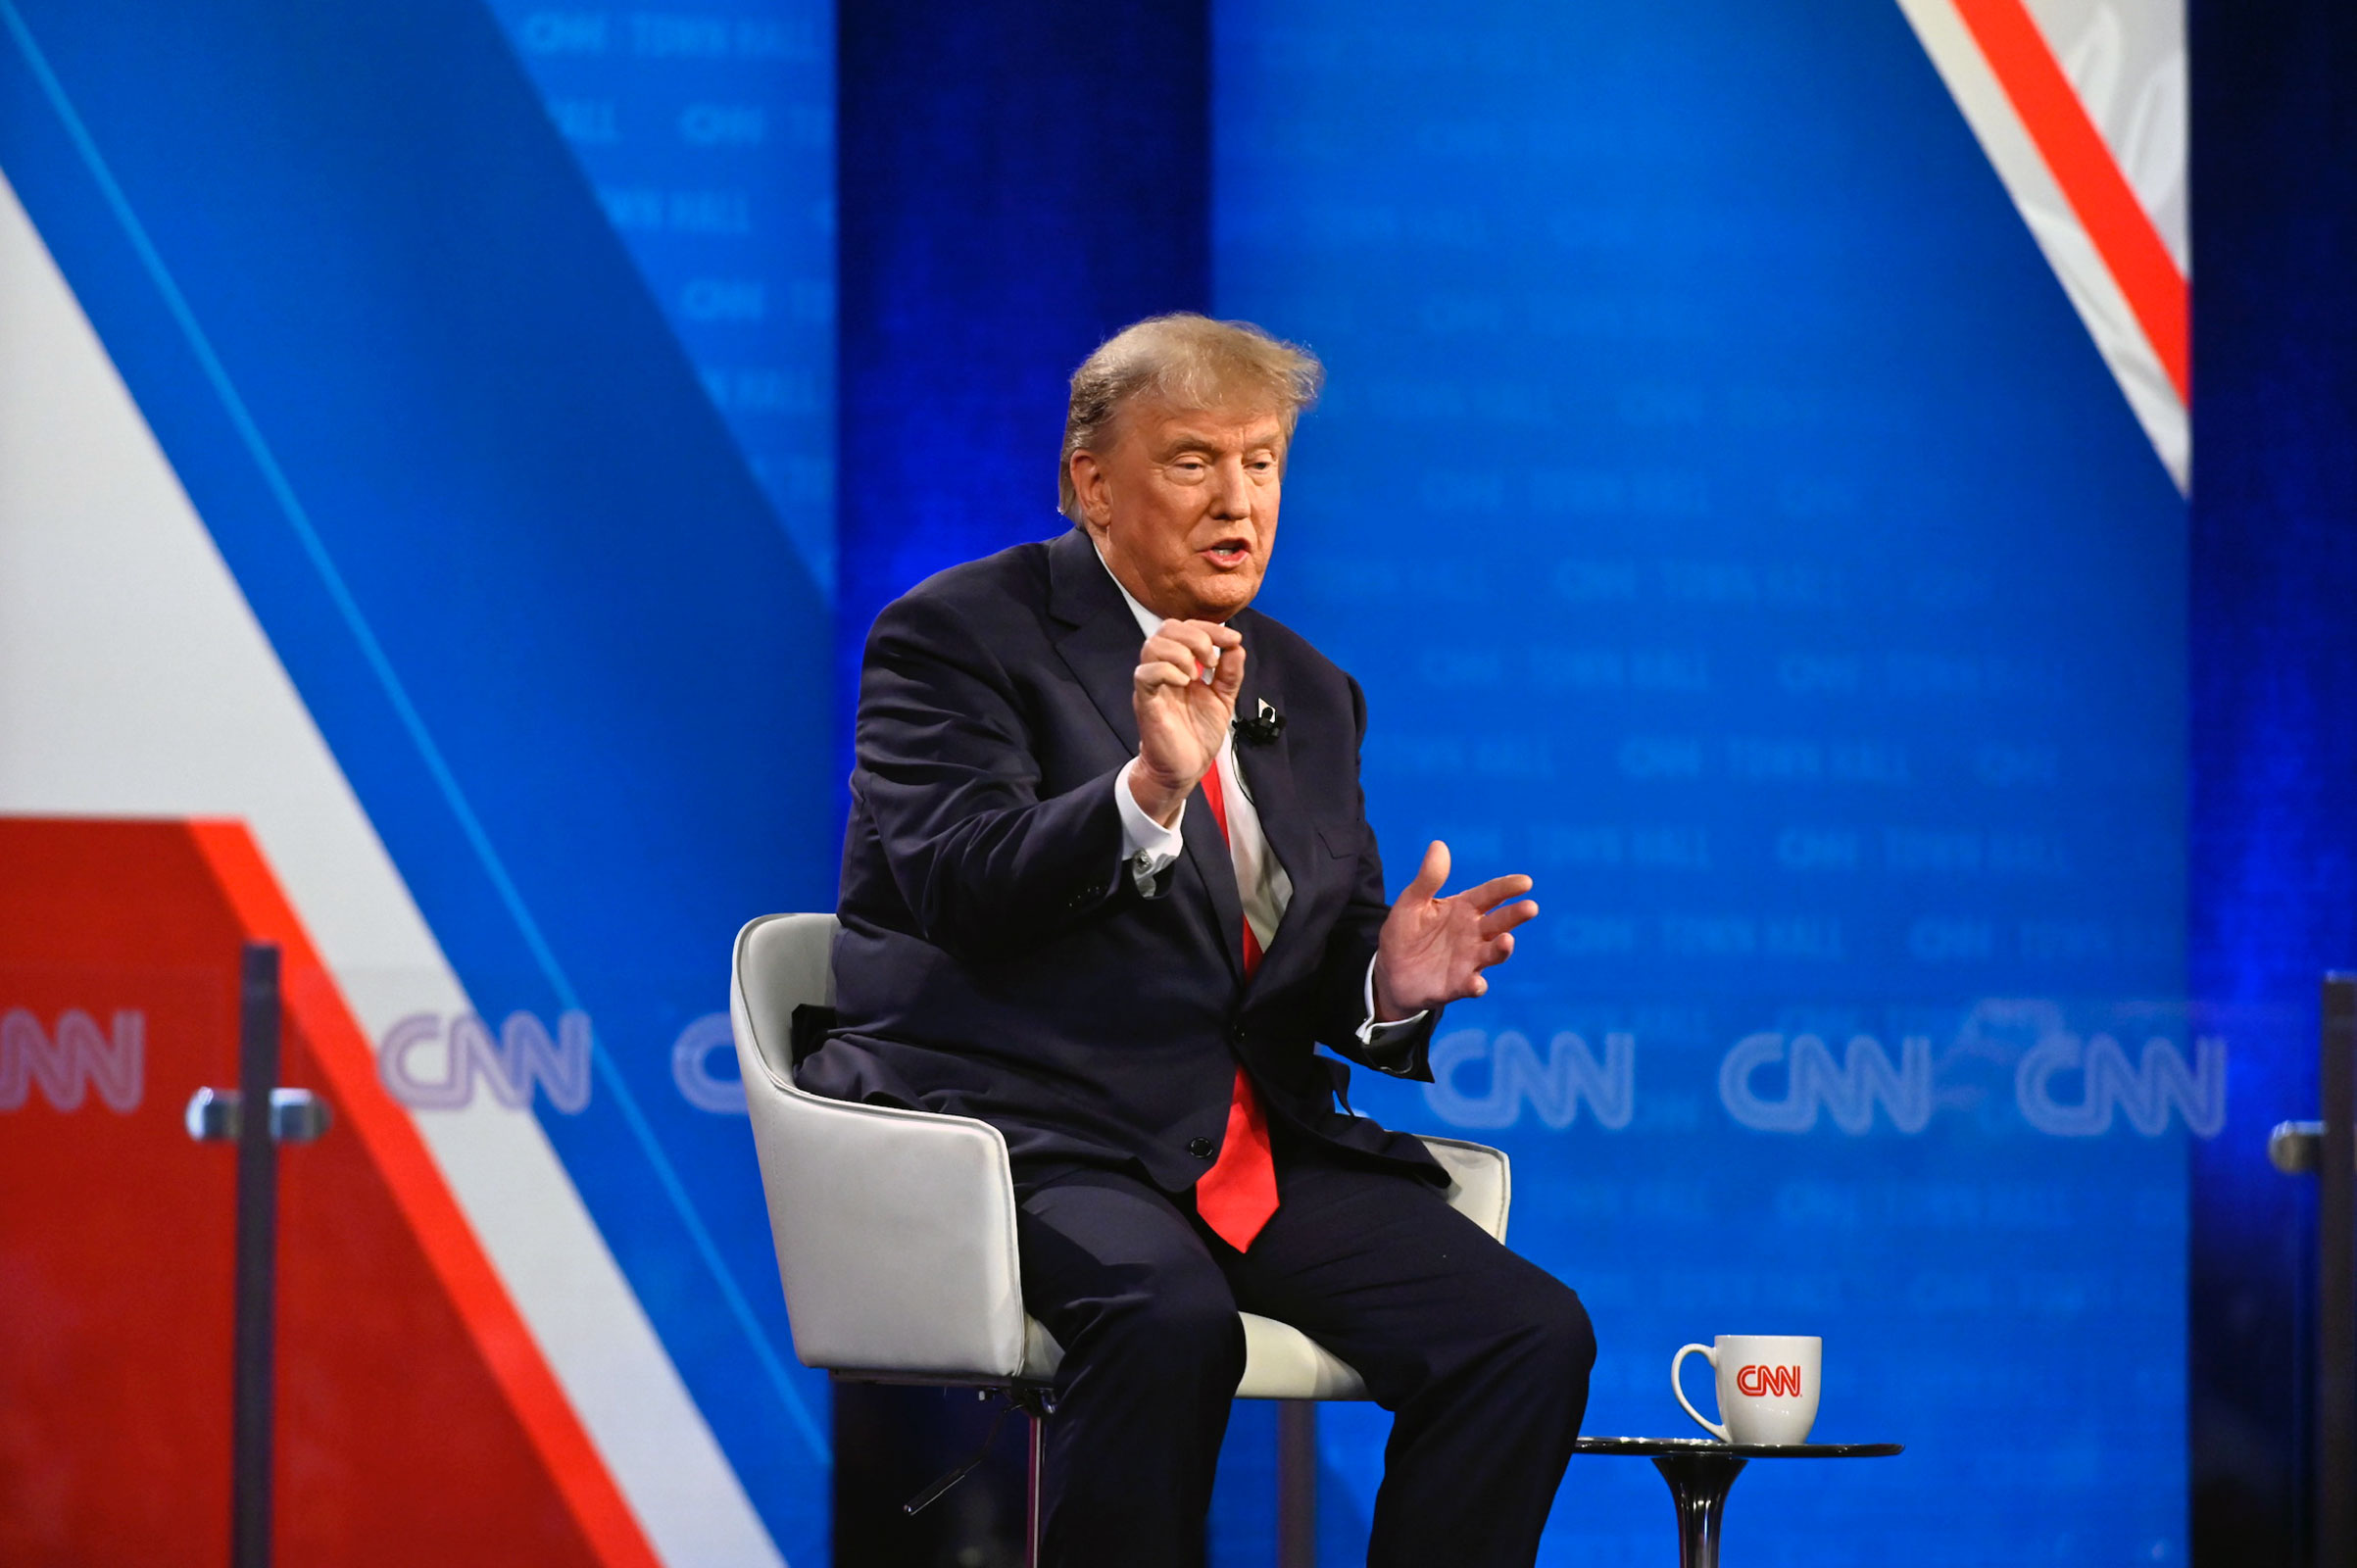 Former President Donald Trump participates in a CNN Republican Town Hall moderated by CNN’s Kaitlan Collins at St. Anselm College in Manchester, New Hampshire.